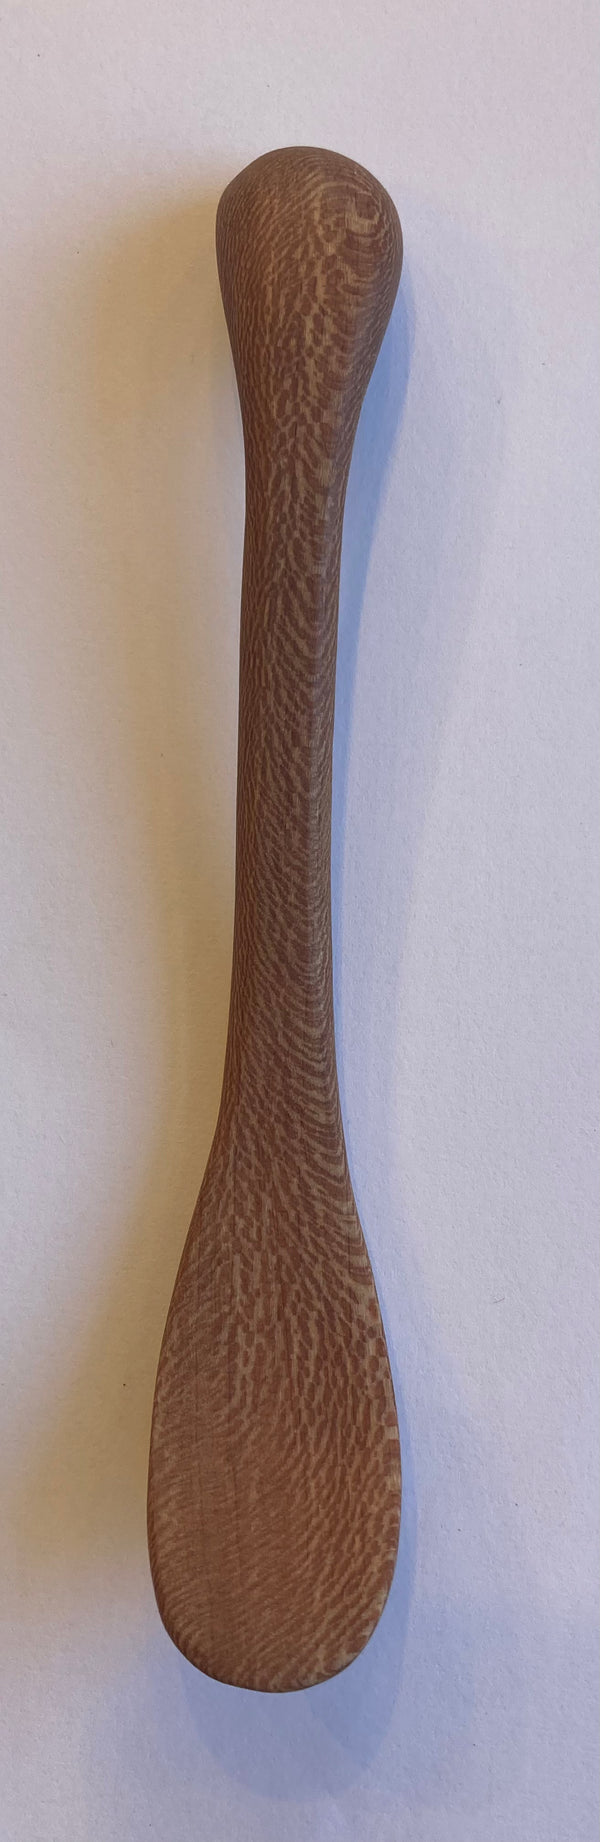 Wooden jelly spoon